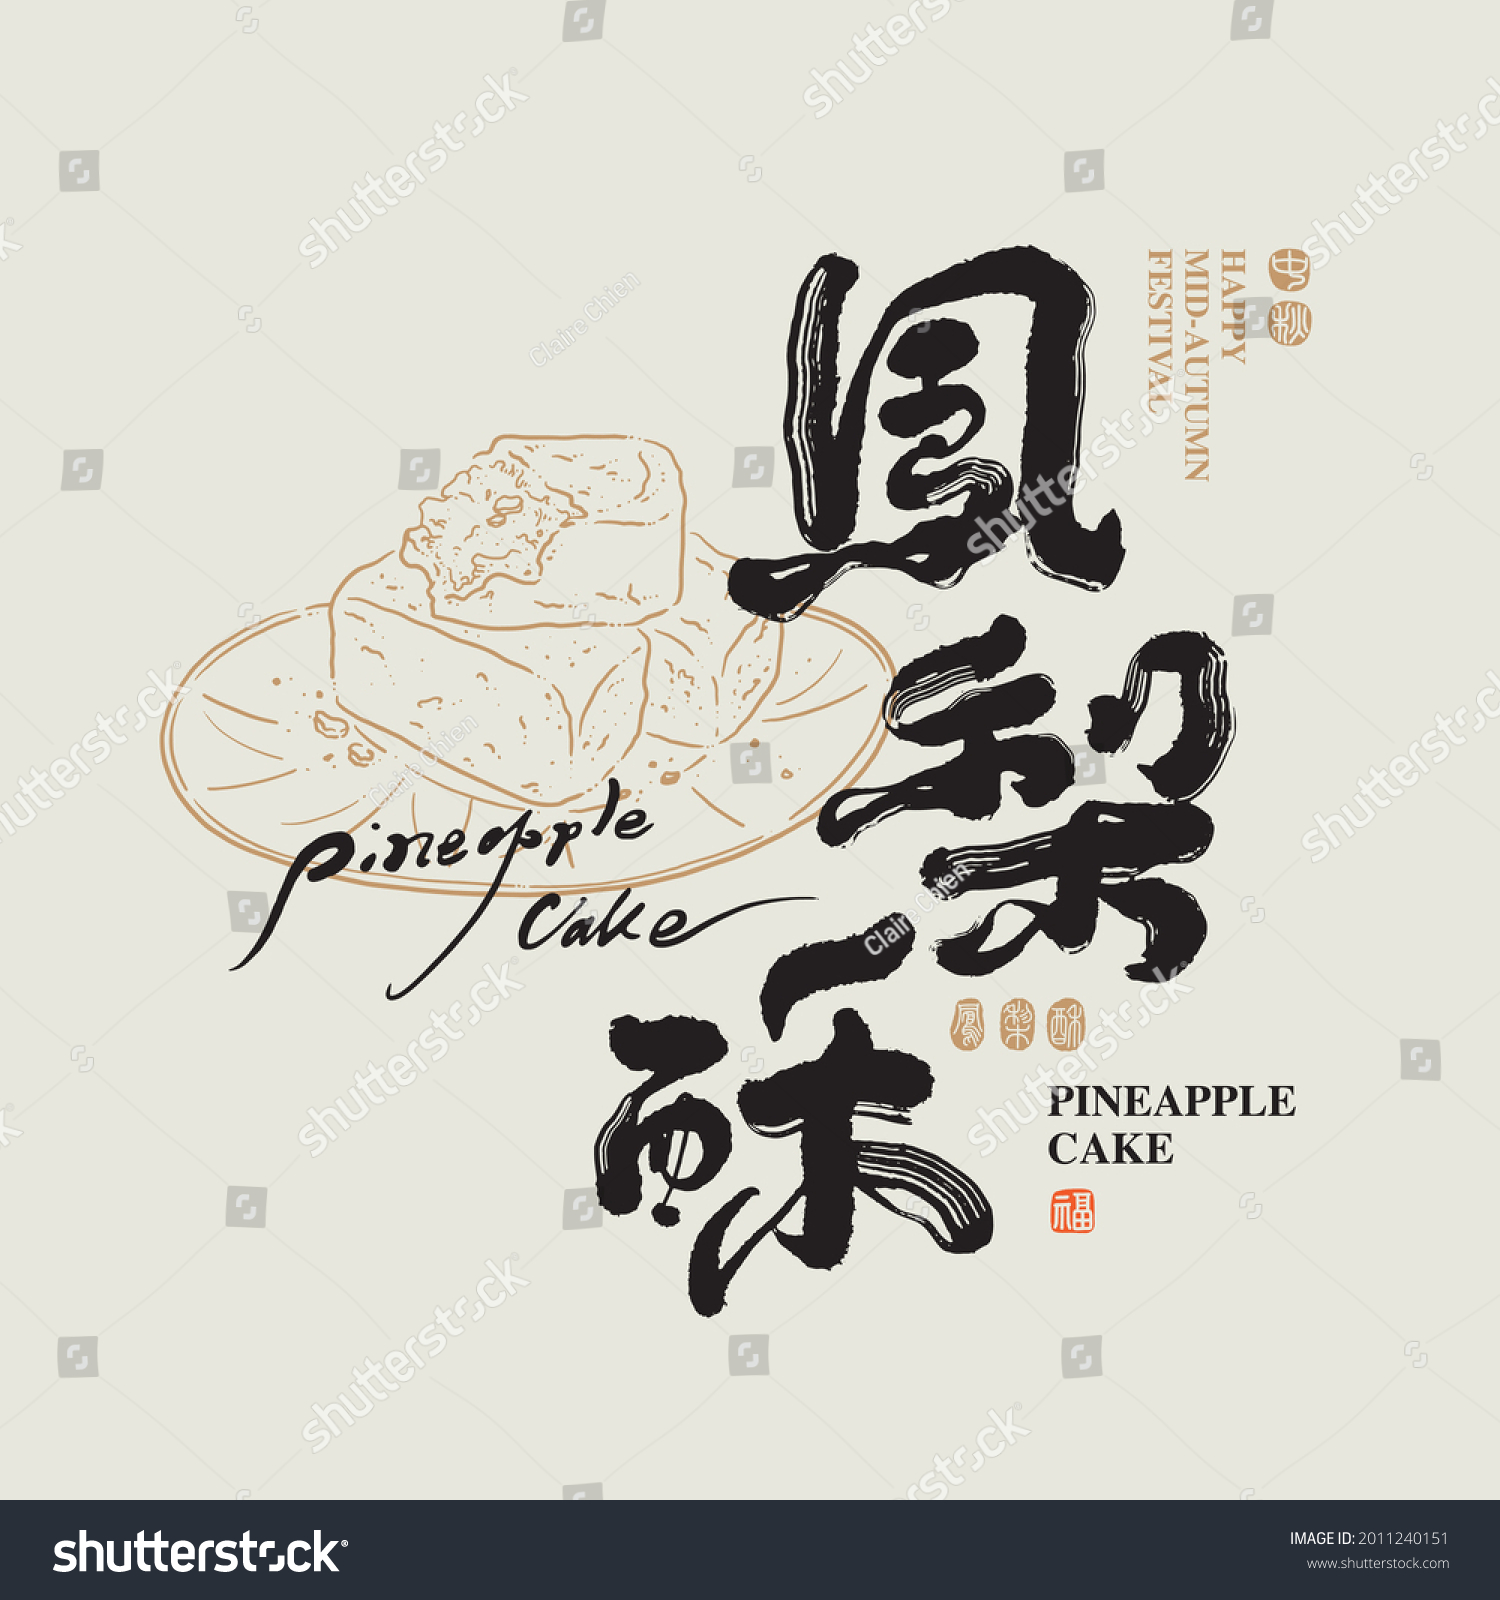 stock-vector-chinese-traditional-calligraphy-chinese-character-pineapple-cake-the-word-on-the-seal-means-2011240151